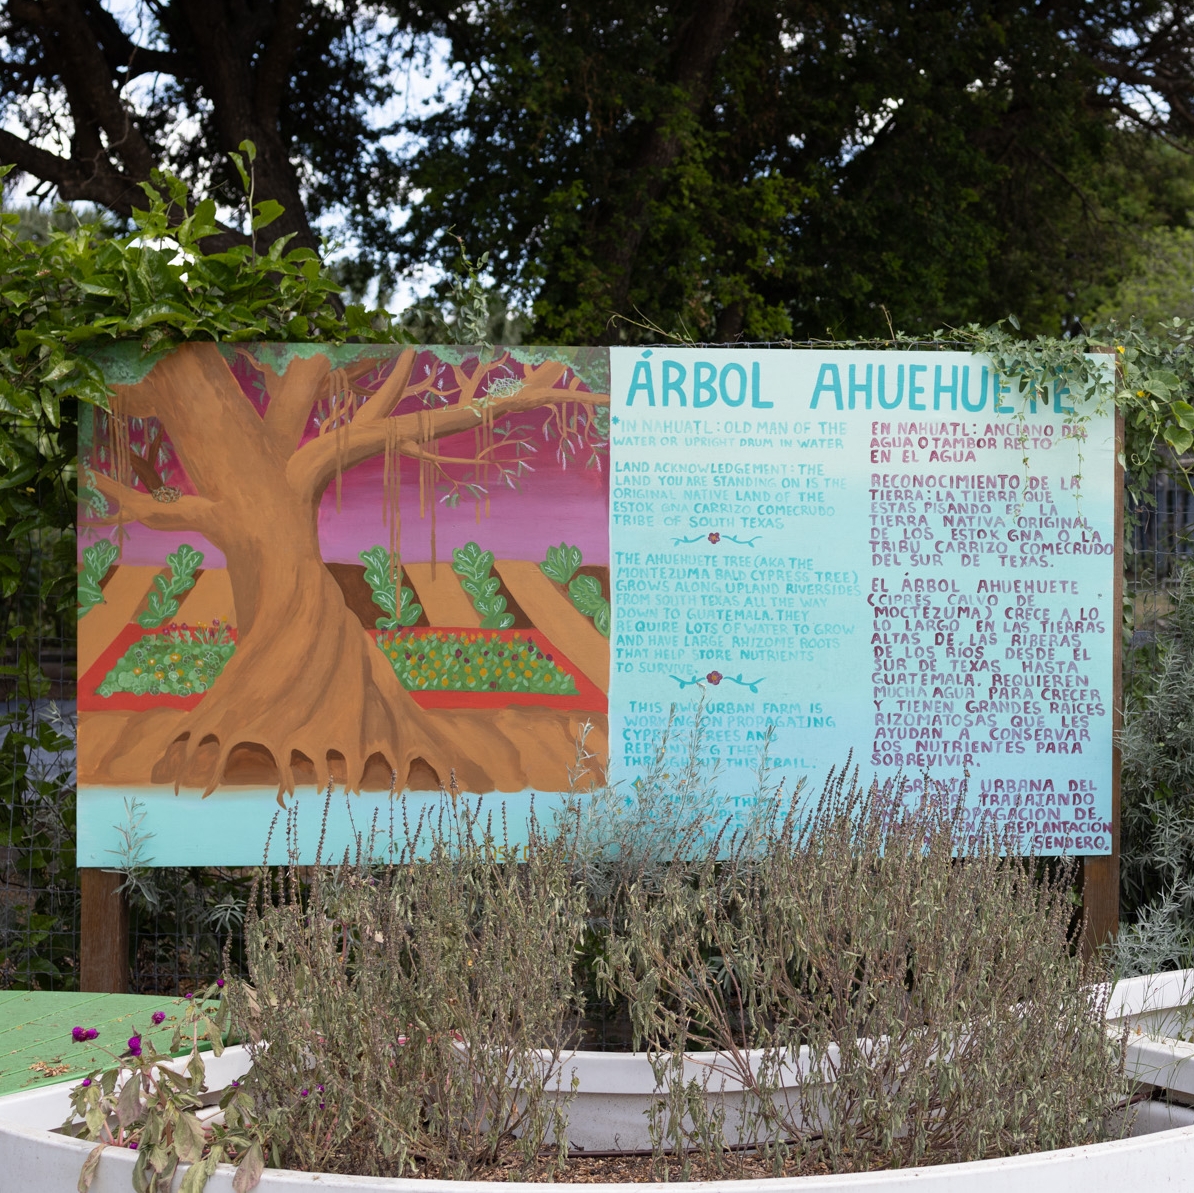 A colorful sign with information in both English and Spanish about the Montezuma cypress tree.